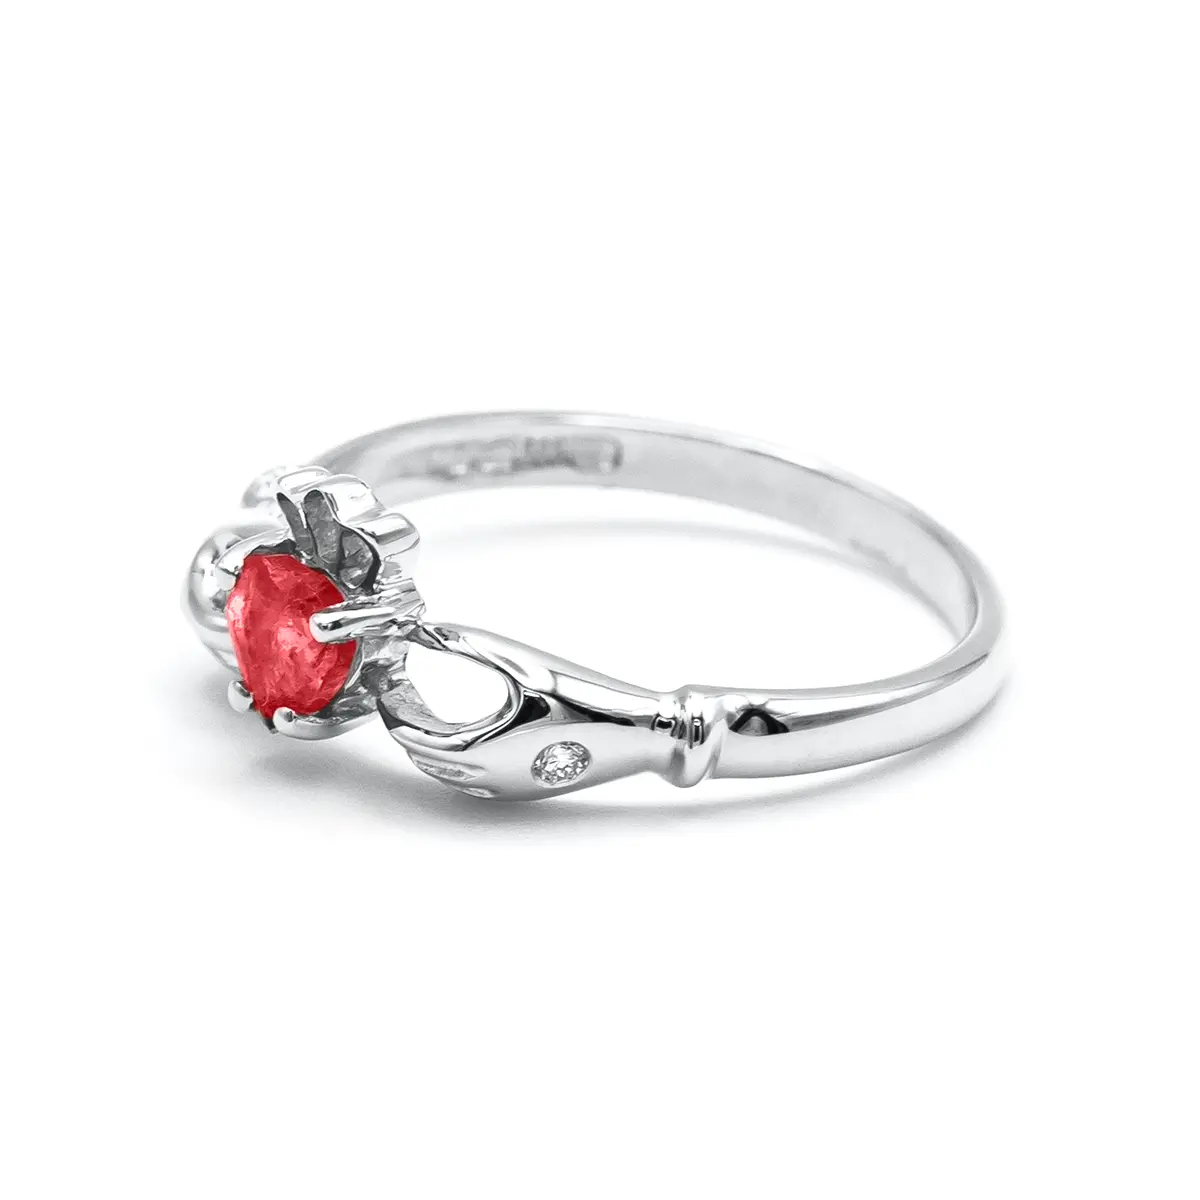 White Gold Claddagh Ring Adorned Heart-shape Ruby And Diamonds